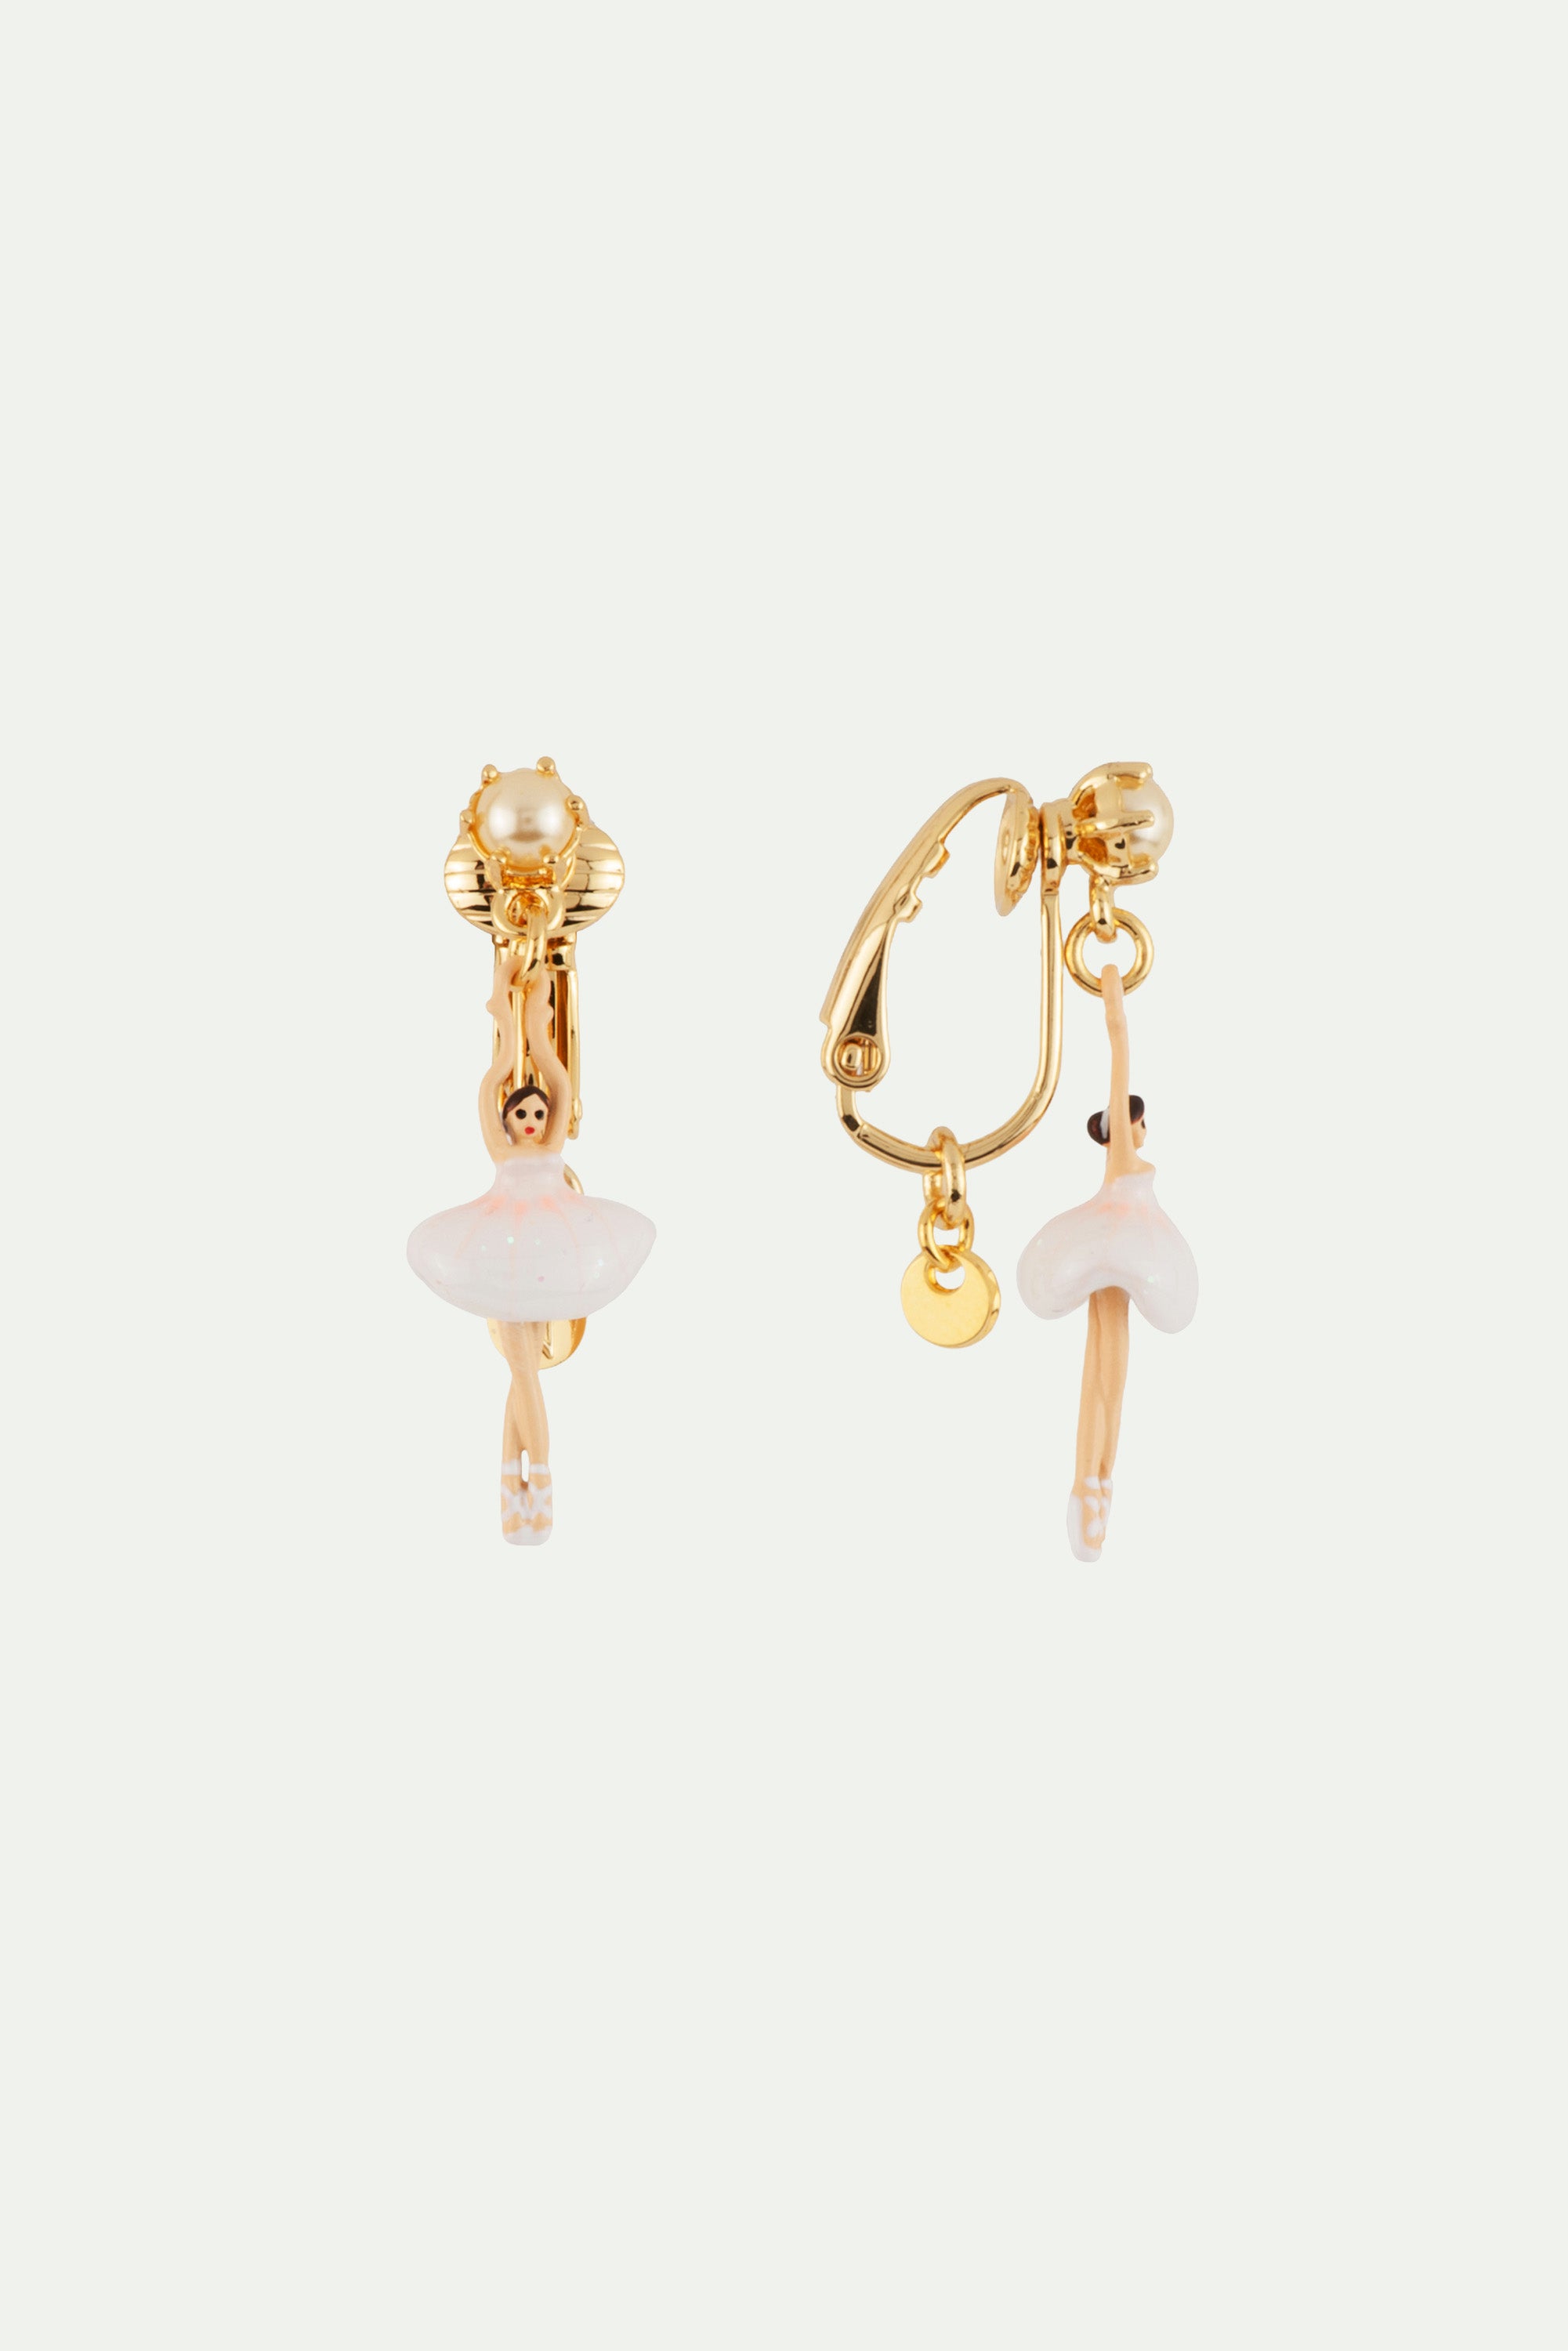 Clip on earrings with mini ballerina in a red tutu